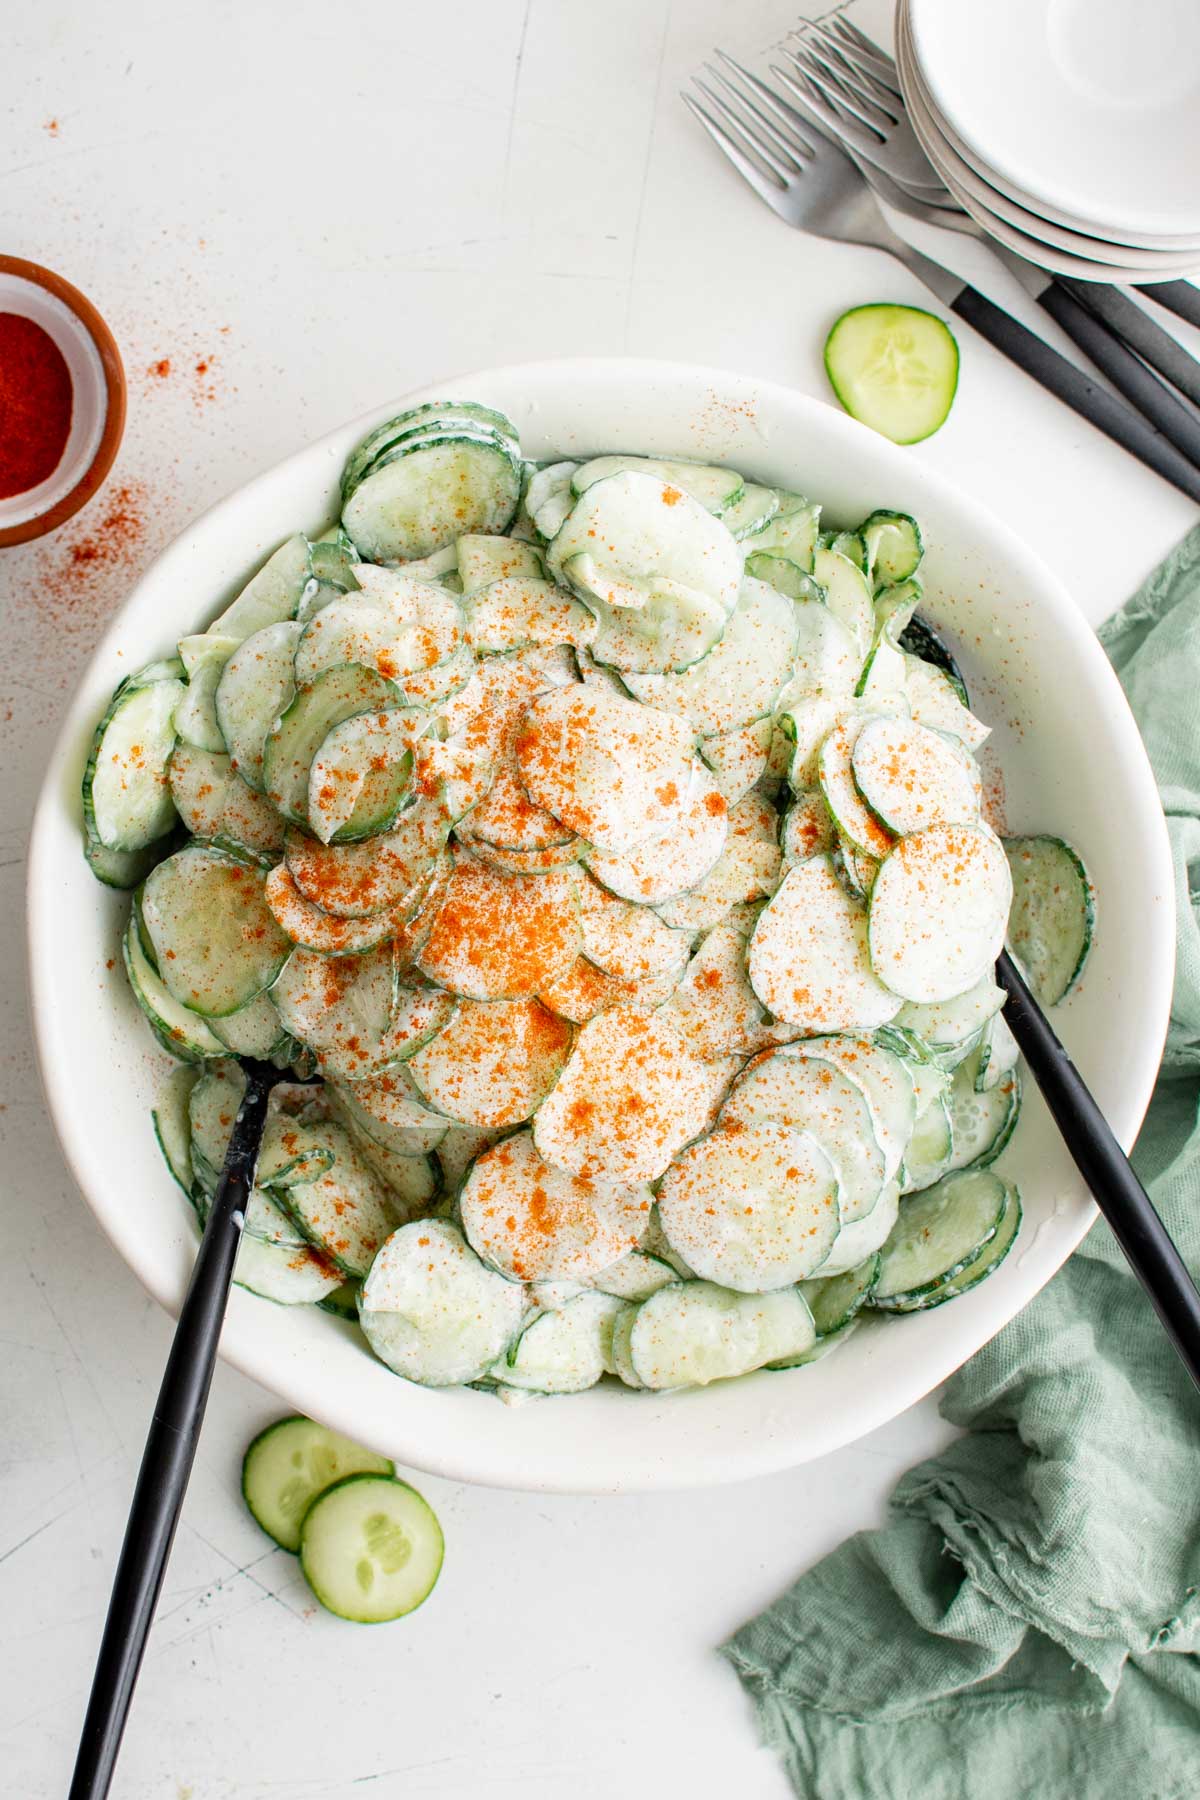 Gurkensalat (cucumber salad) in a large serving bowl with two spoons.